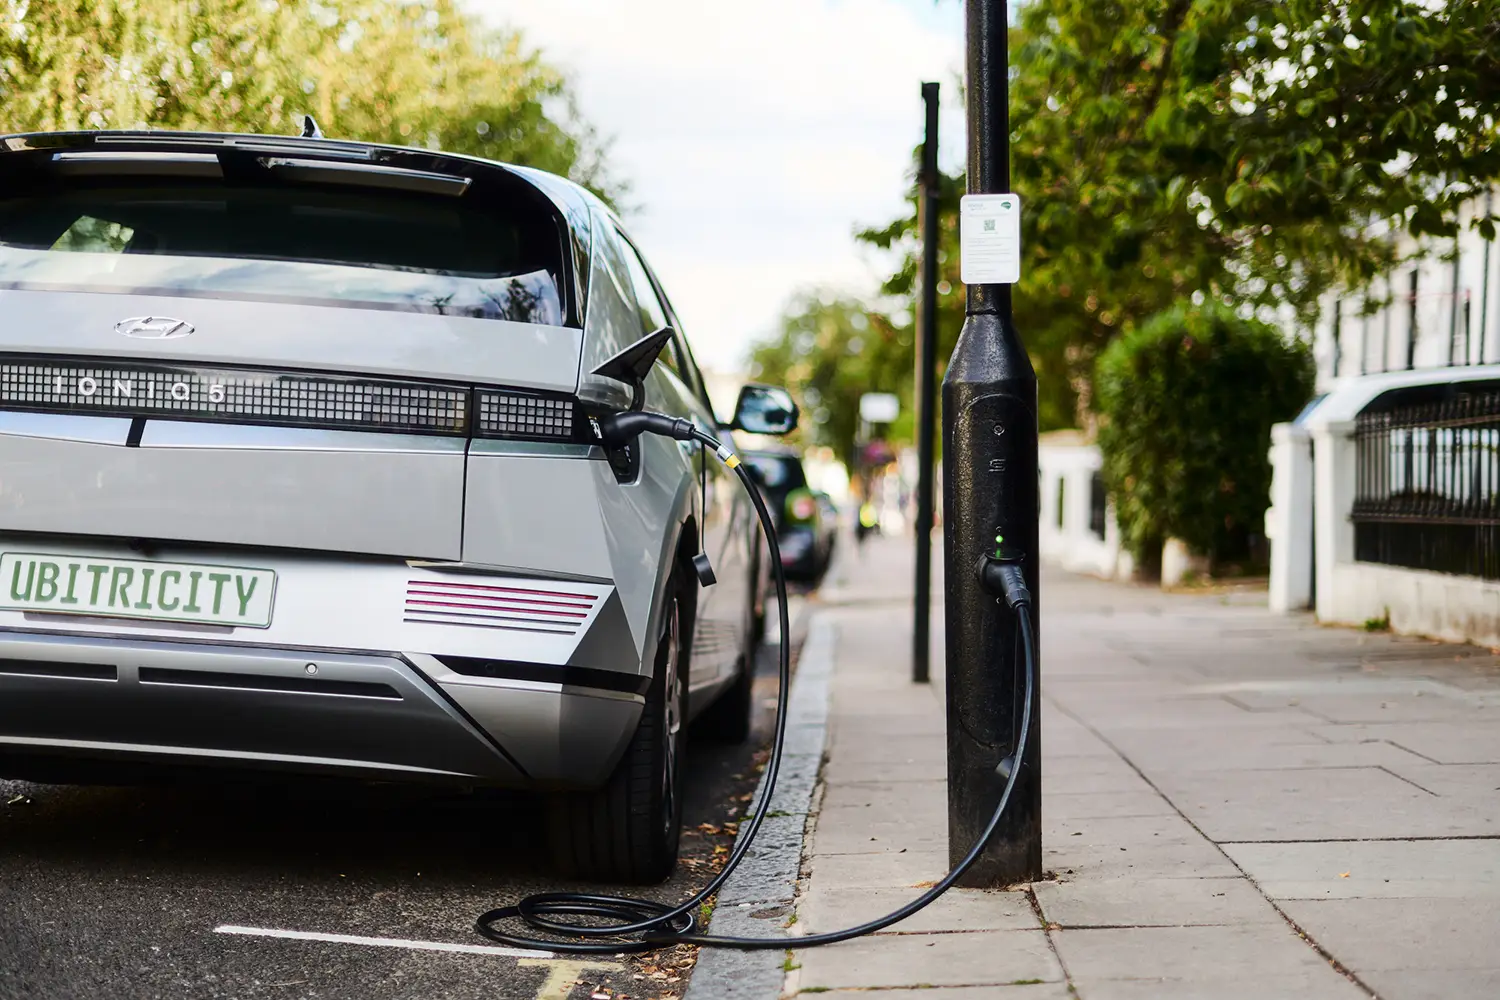 An electric vehicle charges at a ubitricity lamppost charging station, a charging solution to expand public charging infrastructure.